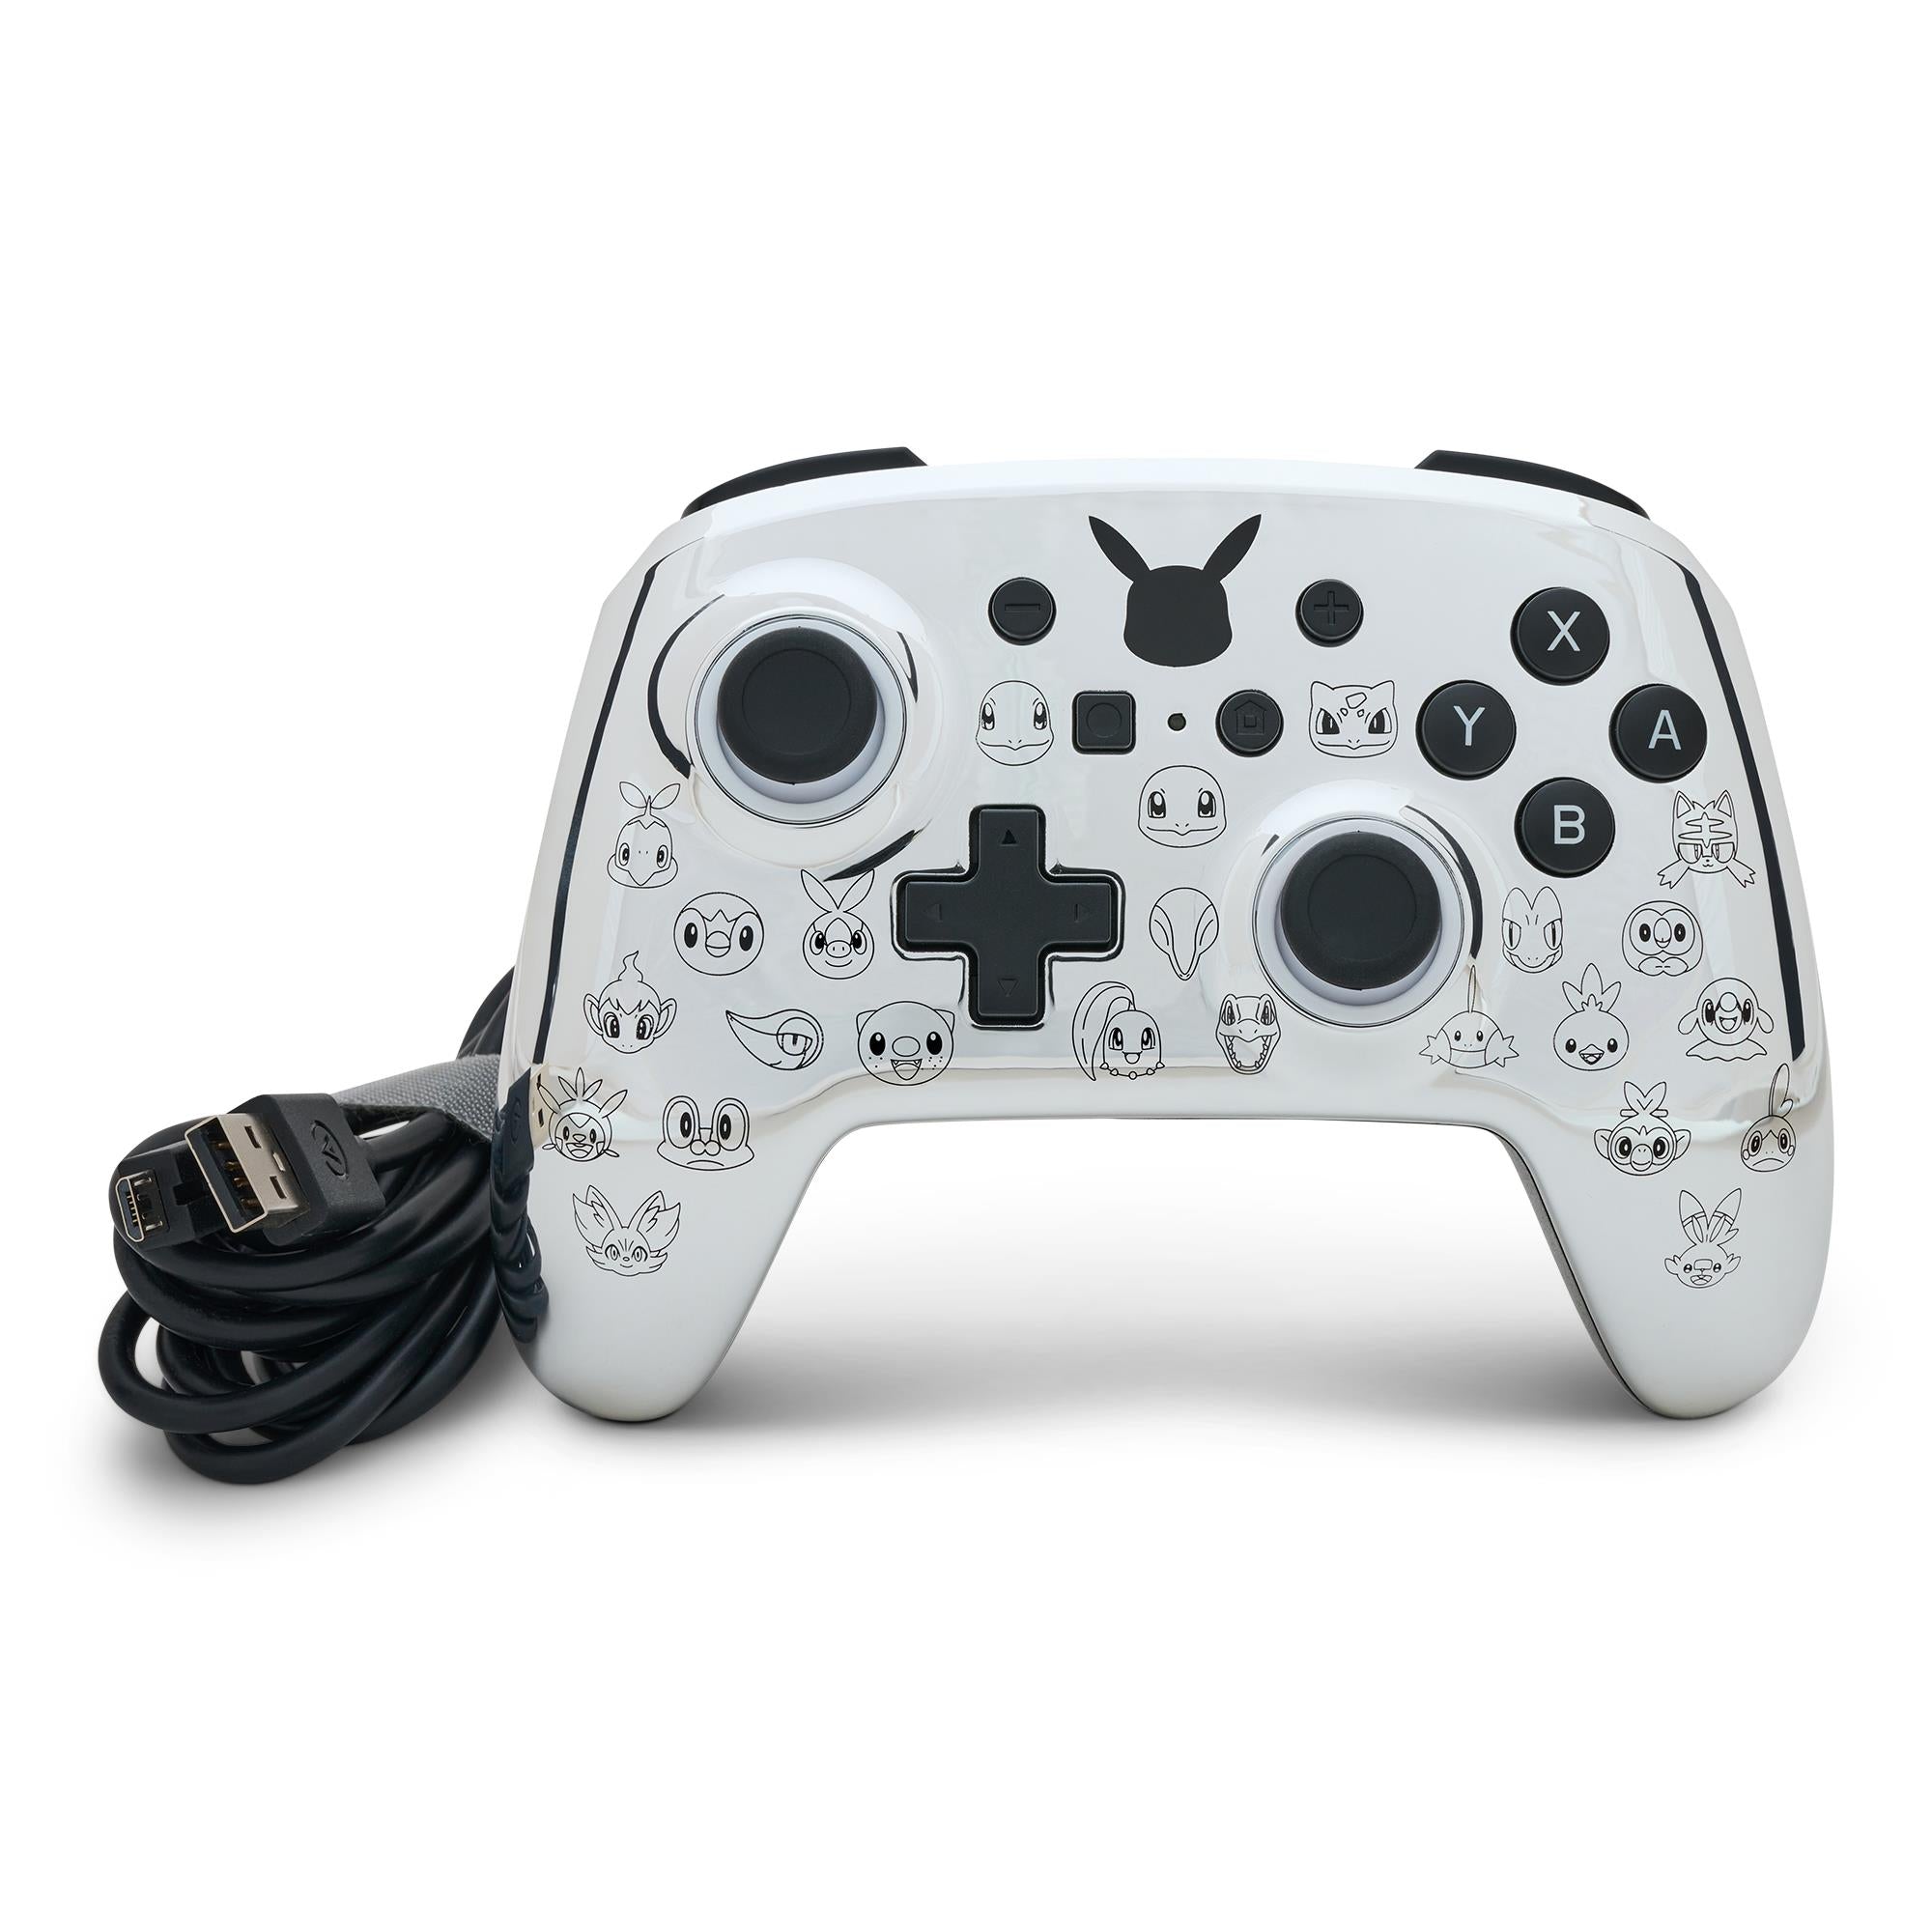 powera enhanced wired controller for nintendo switch (pikachu black & silver)